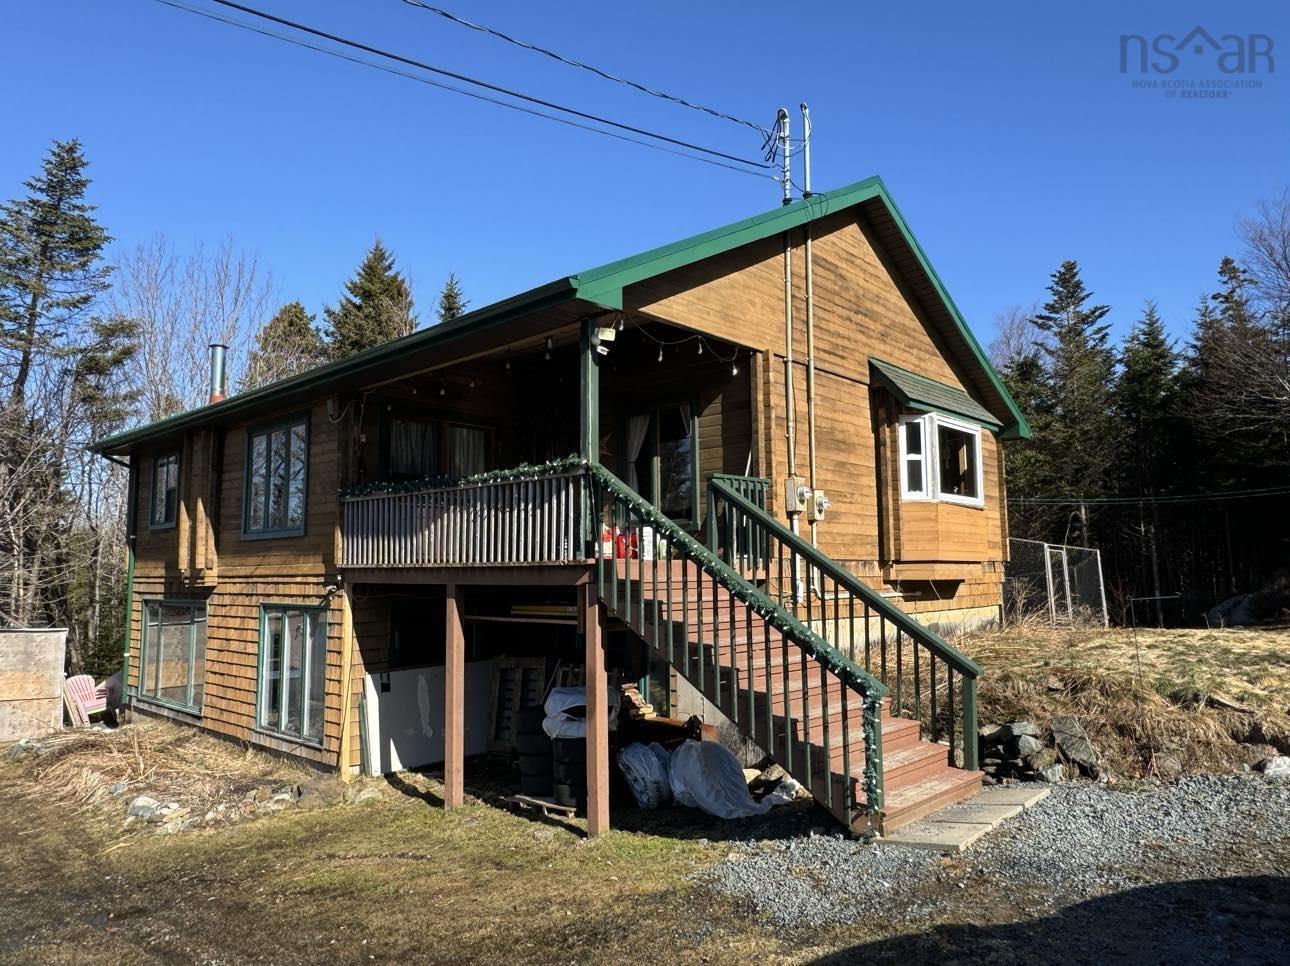 8683 Highway 7, Smiths Settlement NS - MLS<sup>®</sup>: # 202406388